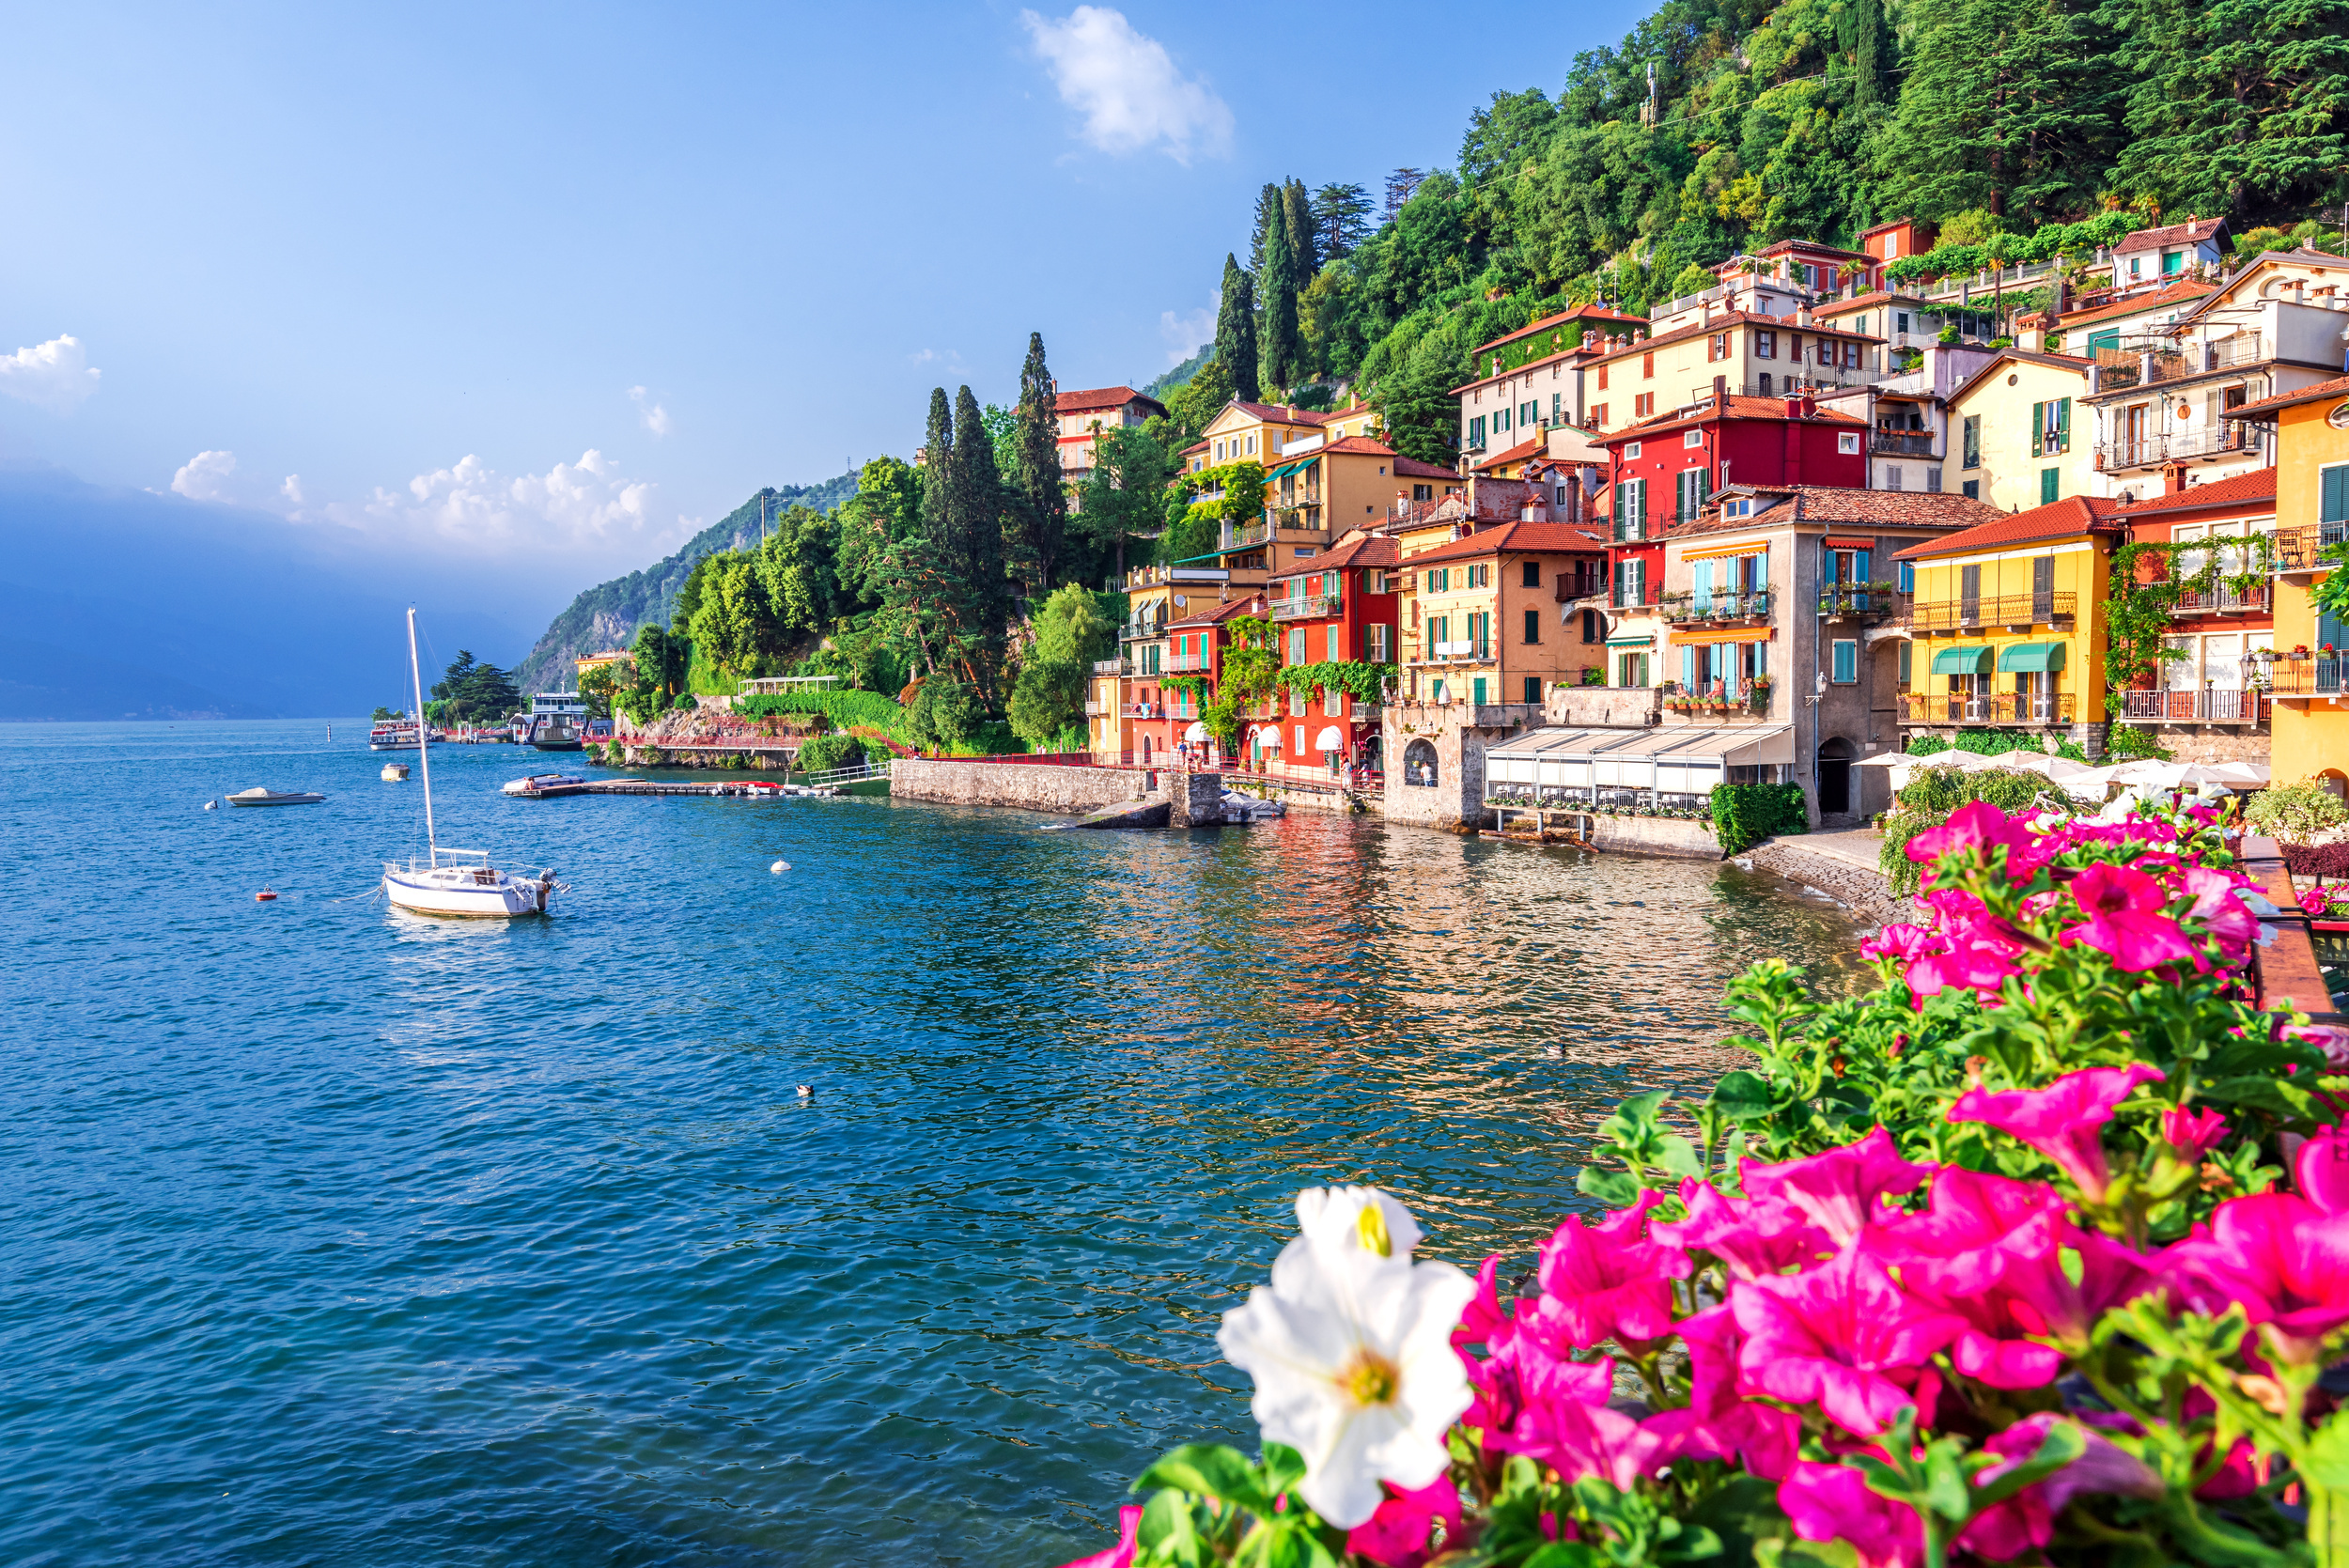 <p>Italy’s most famous lake is the ideal spring getaway. Wildflowers spring up along the shores during these months, making lakeside walks even more beautiful.</p><p><a href='https://www.msn.com/en-us/community/channel/vid-cj9pqbr0vn9in2b6ddcd8sfgpfq6x6utp44fssrv6mc2gtybw0us'>Follow us on MSN to see more of our exclusive lifestyle content.</a></p>